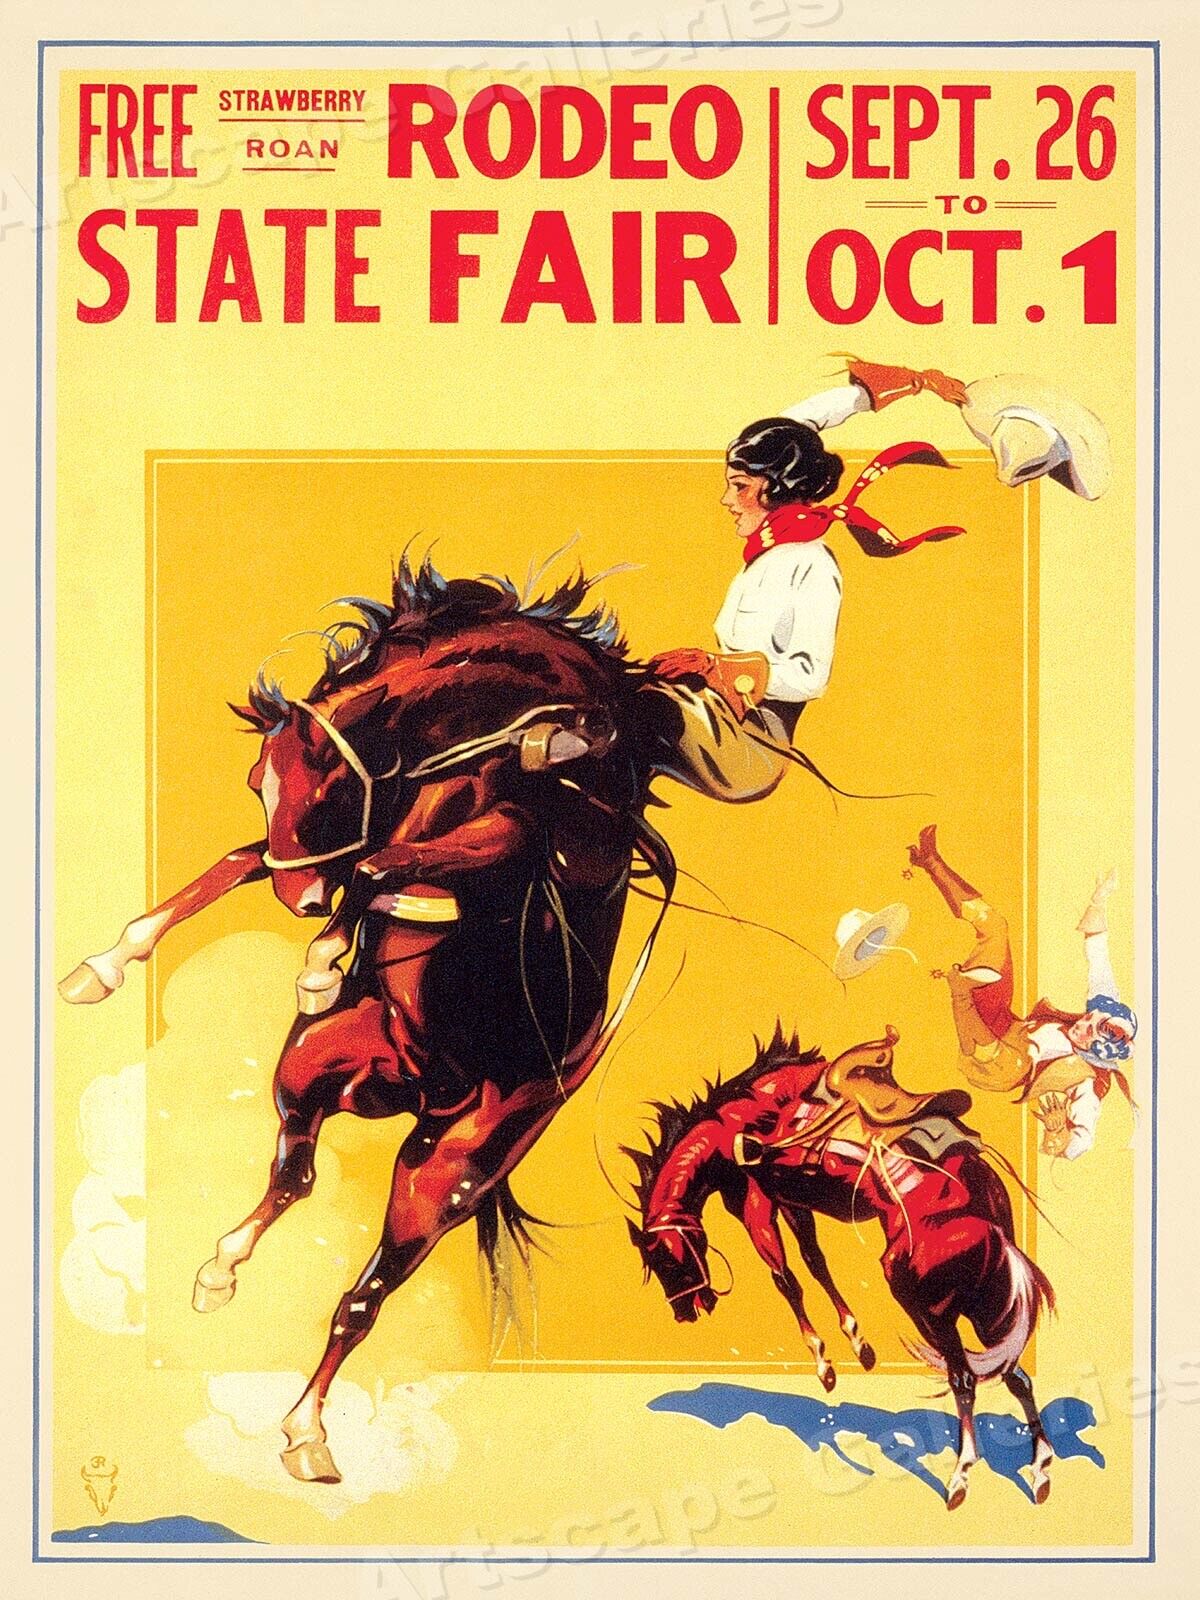 1930s Rodeo Cowgirl State Fair Rodeo Vintage Style Western Poster - 20x28